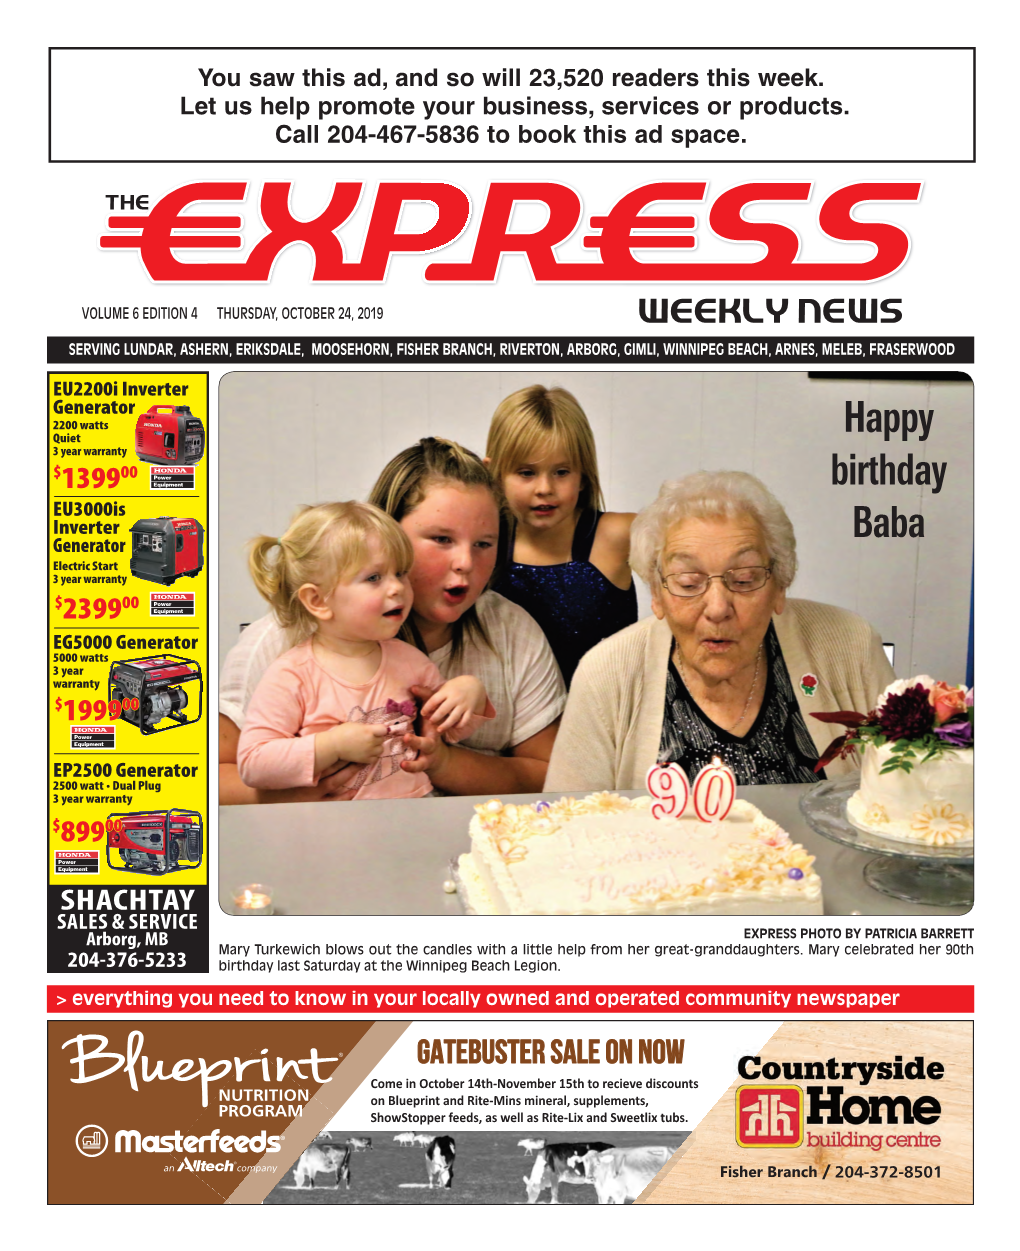 Proofed-Express Weekly News 102419.Indd